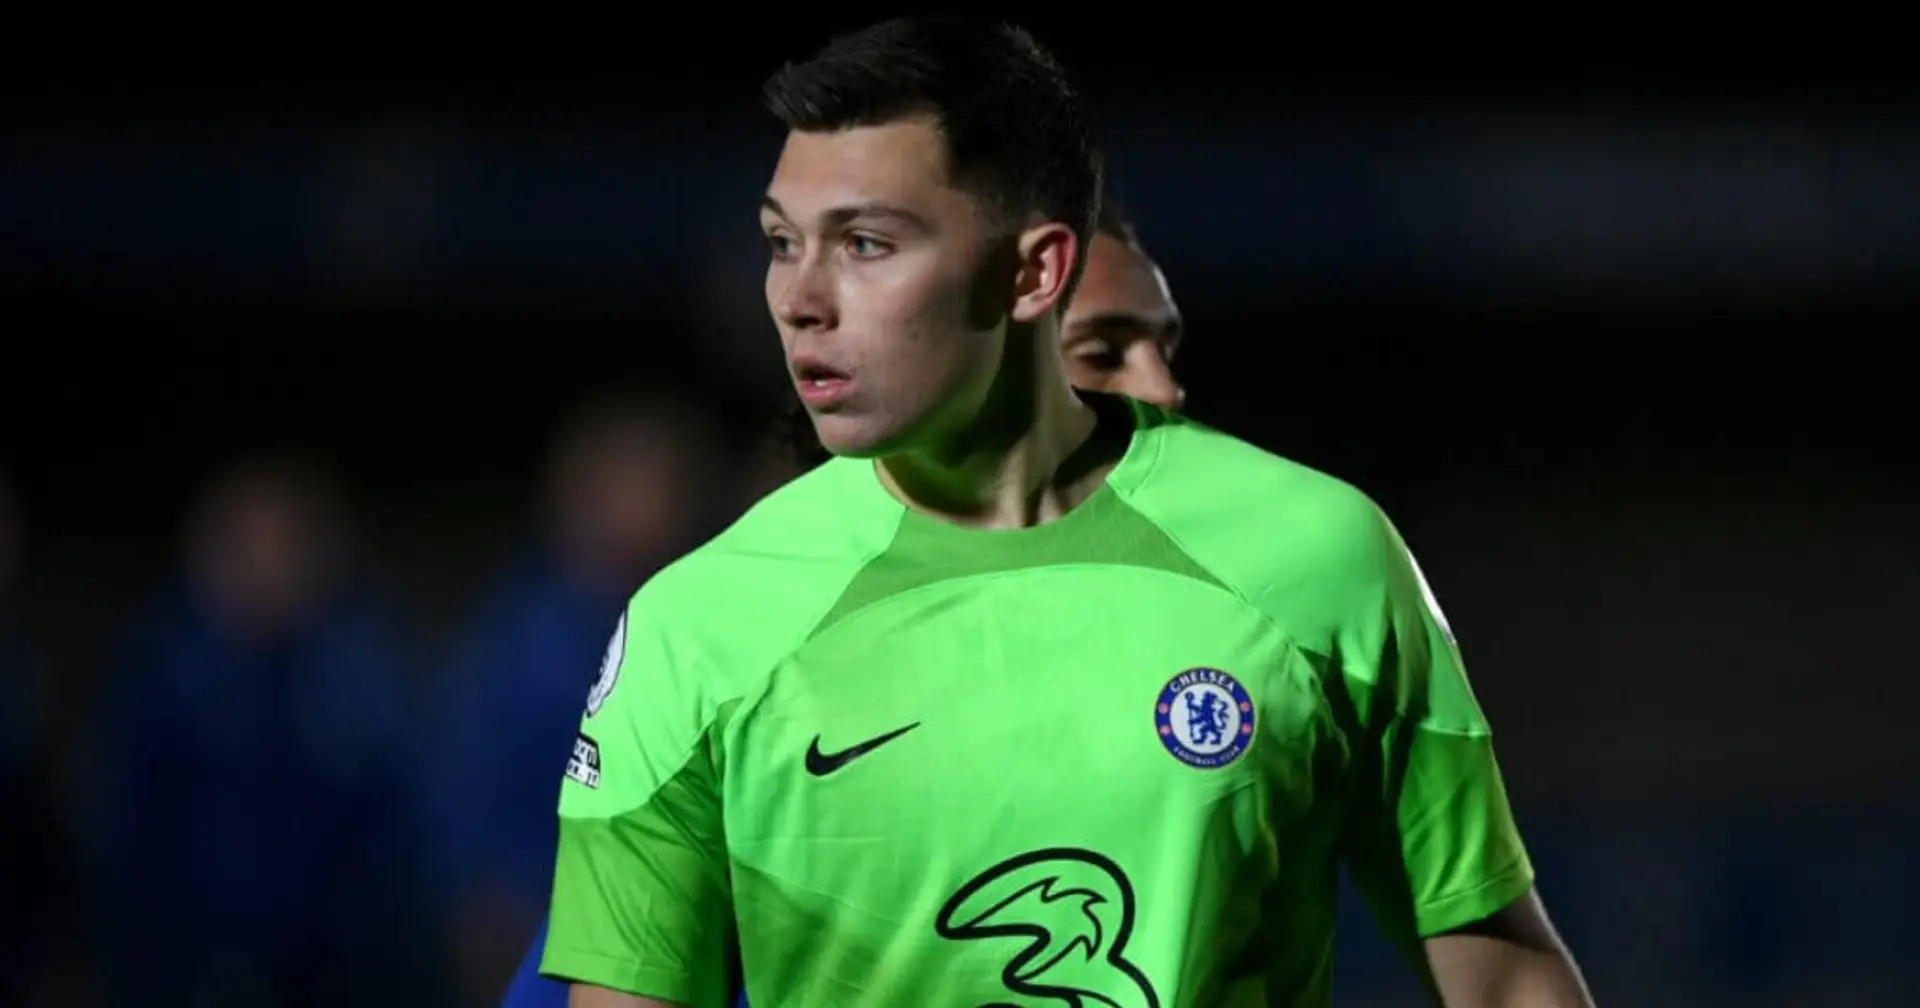 'Here we go soon': Romano confirms Chelsea keeper Slonina set to join Belgian side on loan